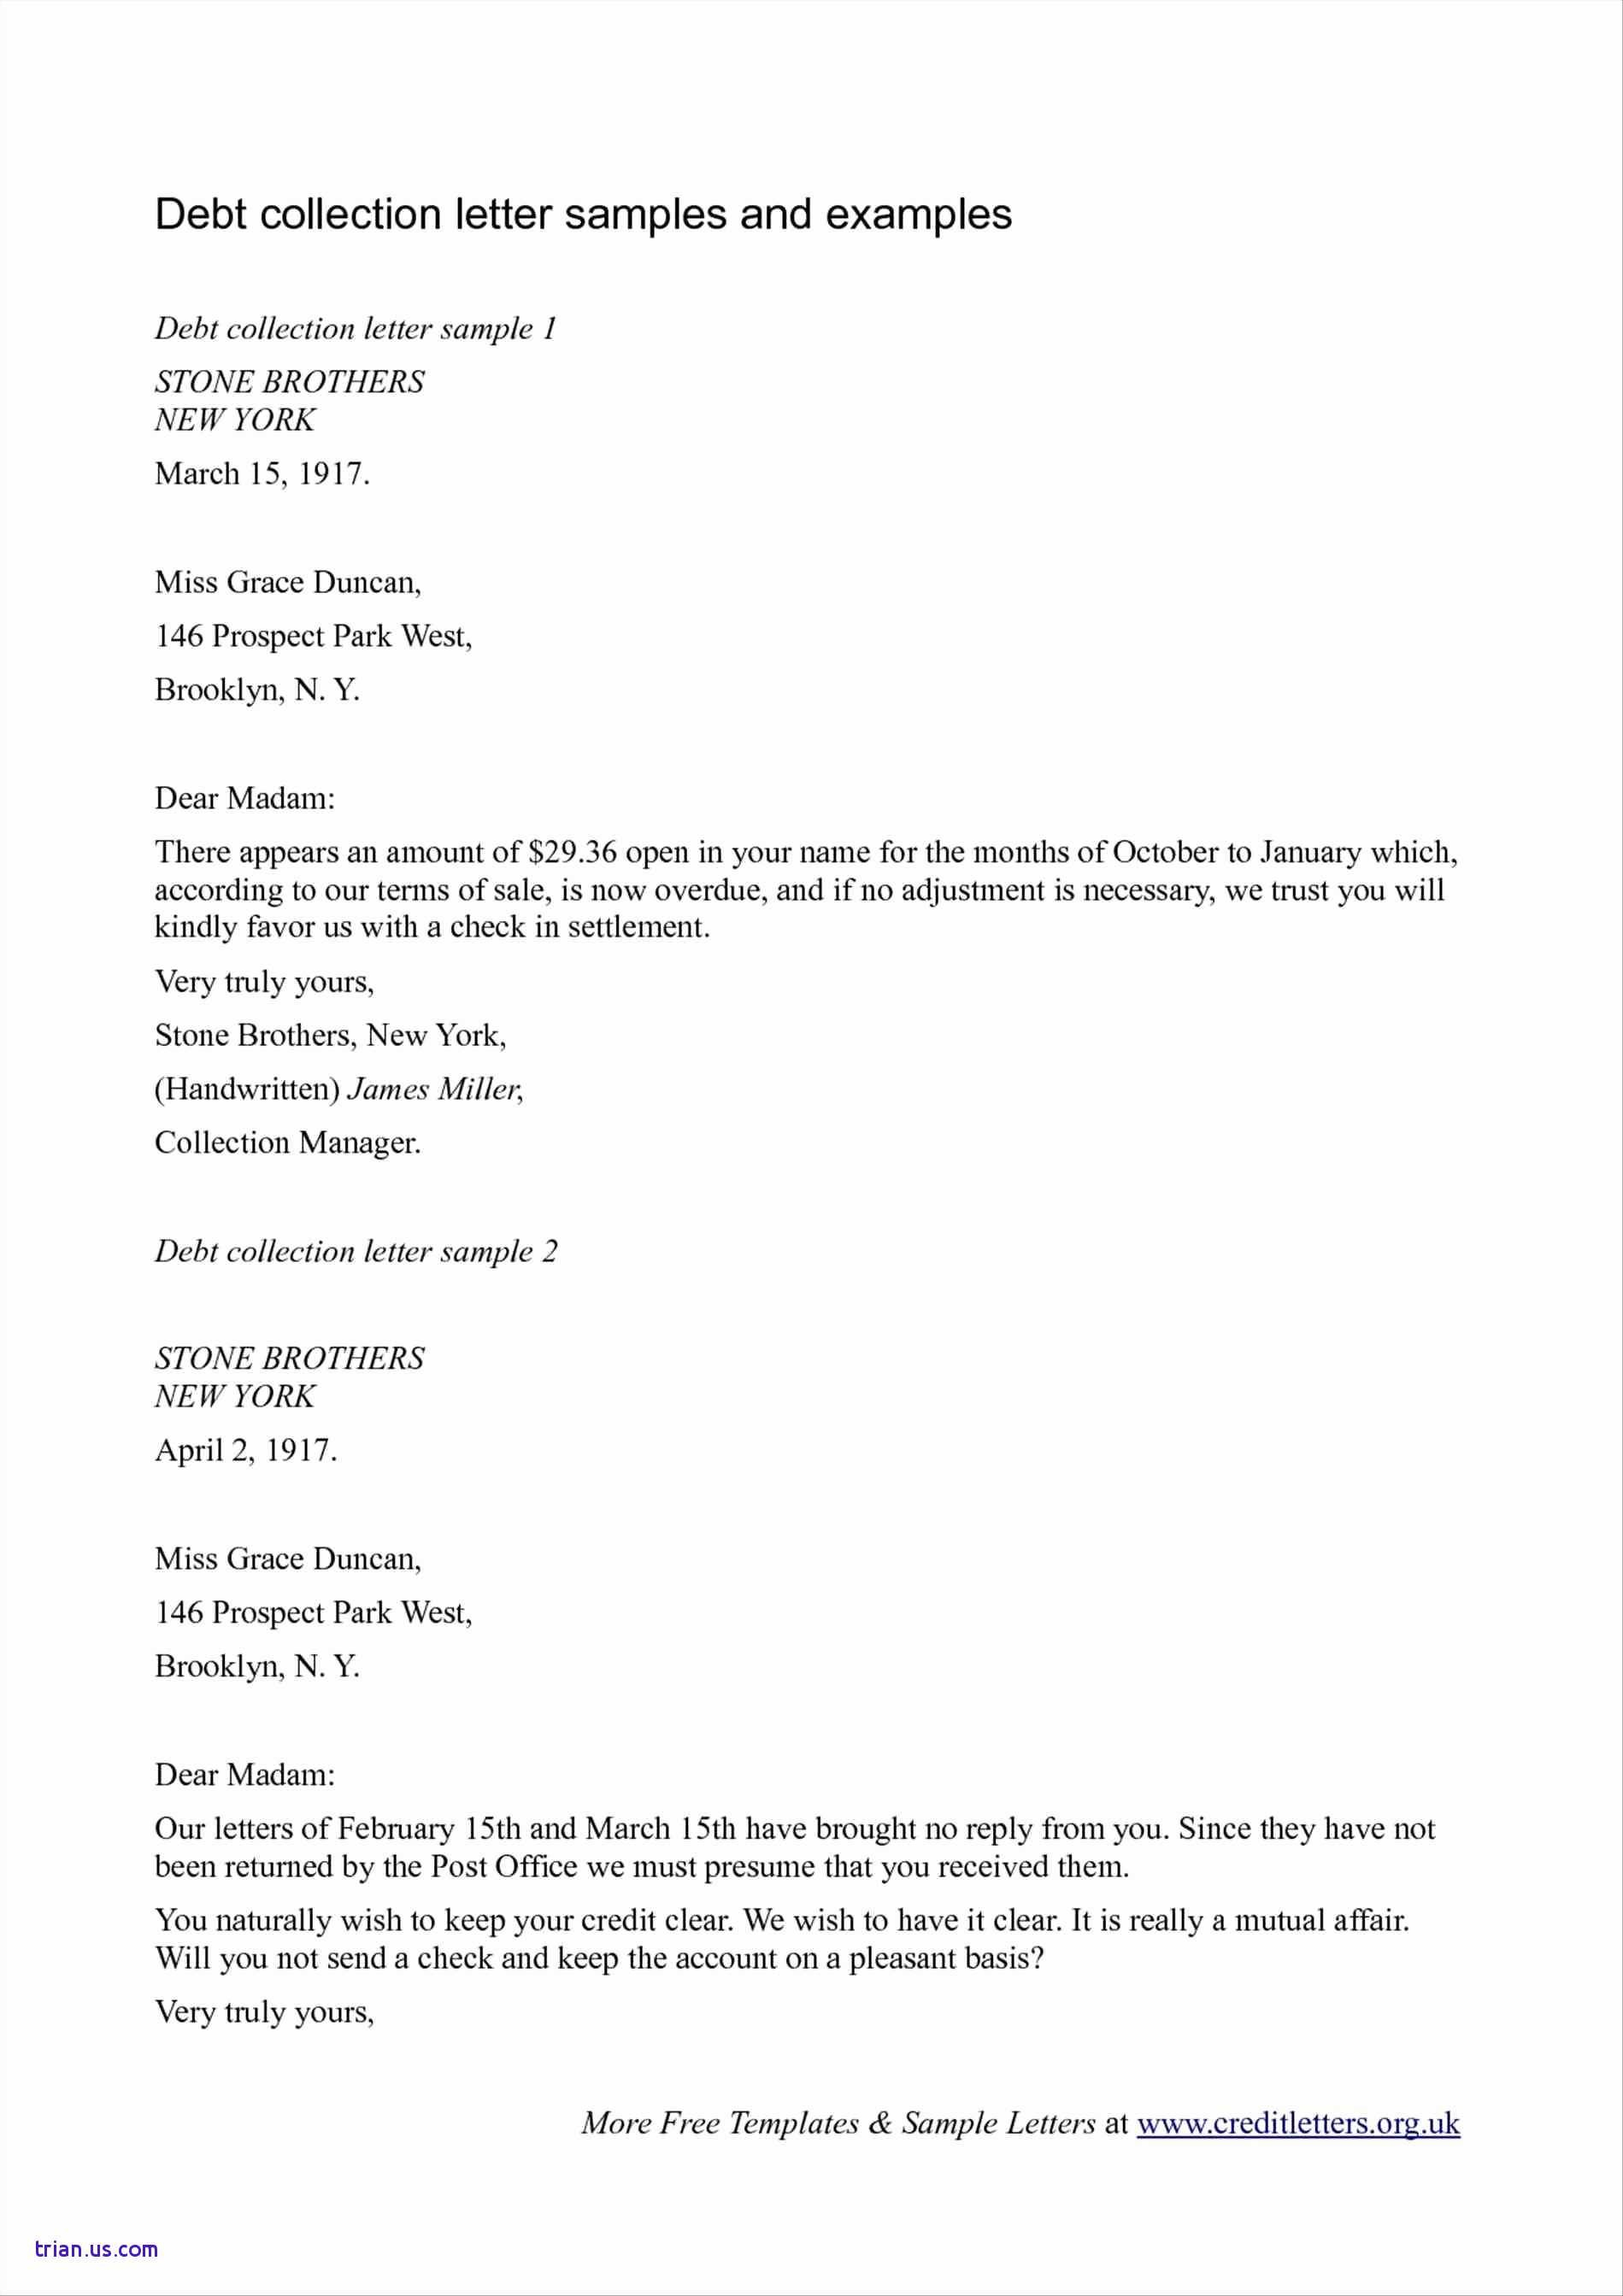 cease-and-desist-collection-agency-letter-template-collection-letter